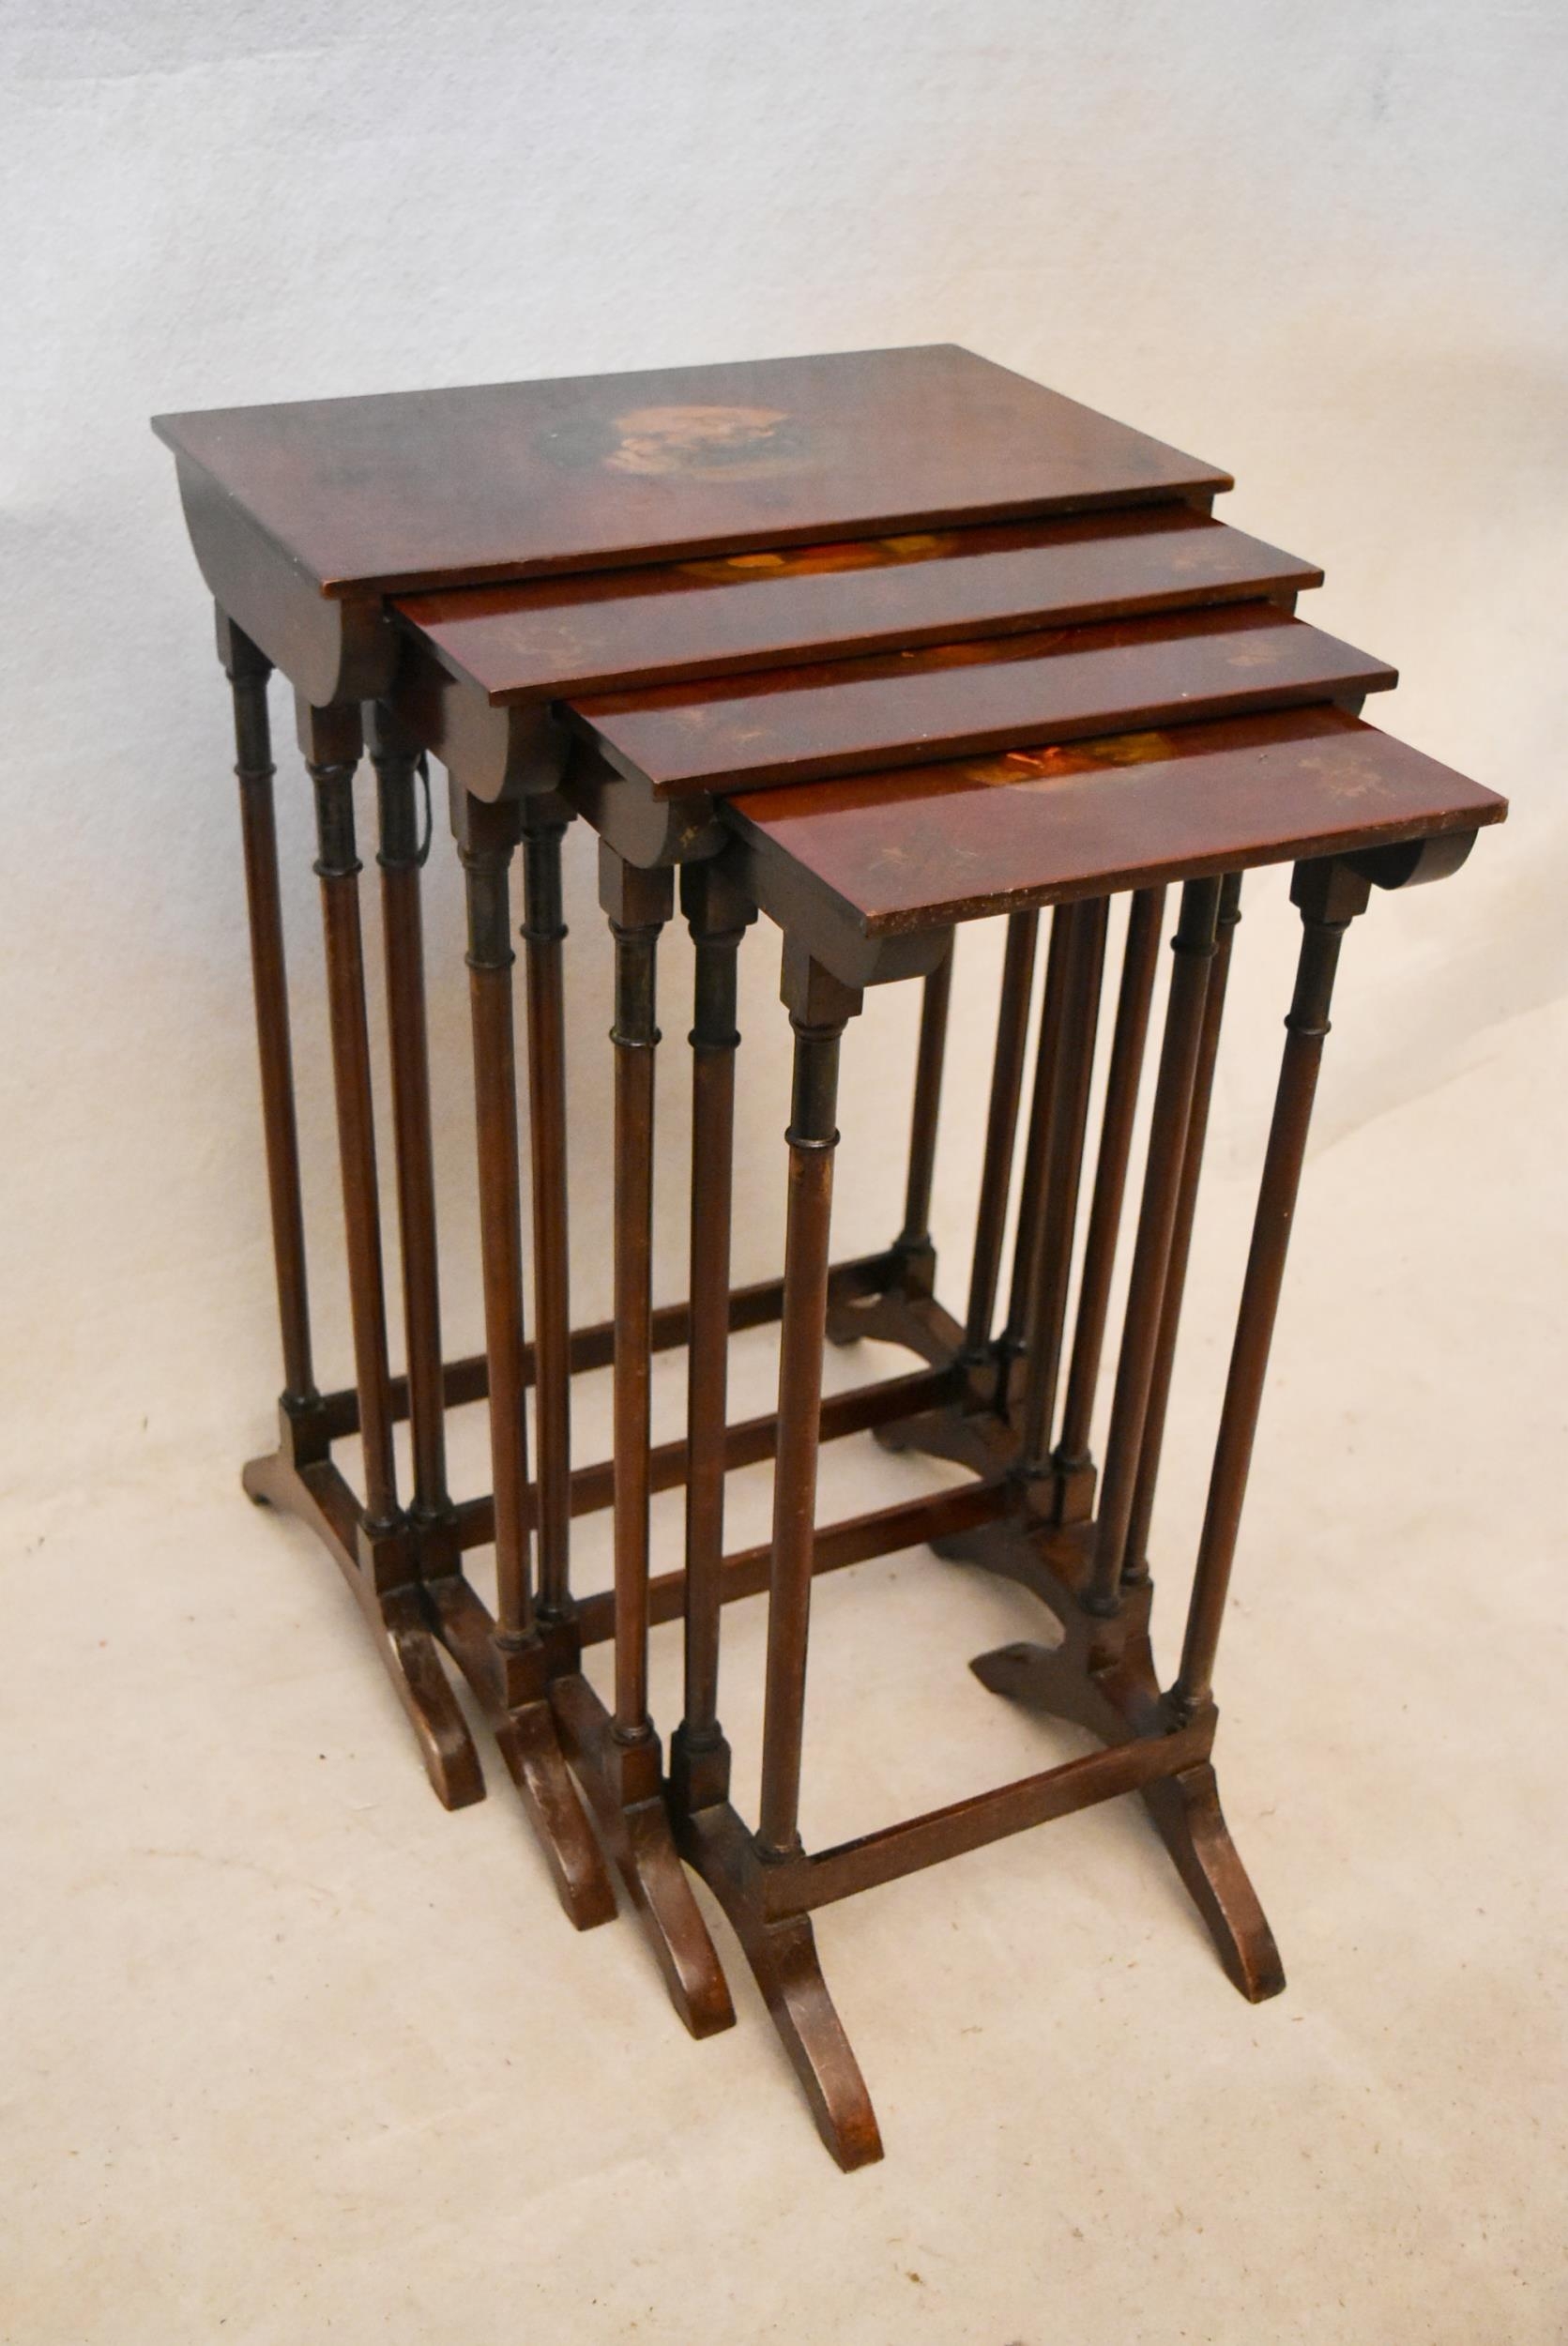 A quartetto nest of Regency style mahogany tables, each with rectangular tops hand painted with a - Image 2 of 5